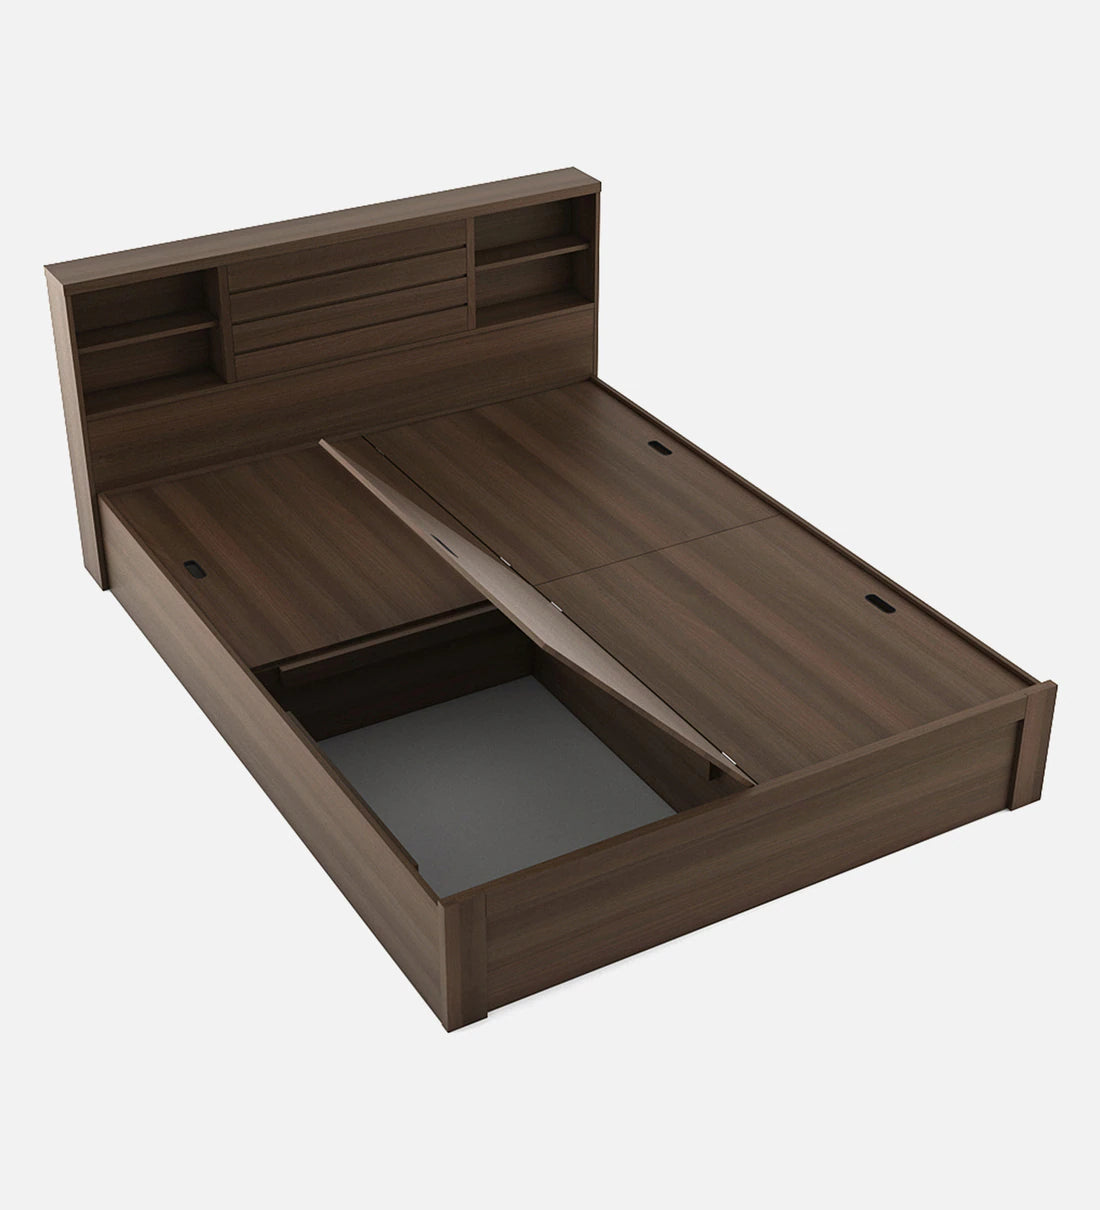 King Size Bed in Brown Finish with Box Storage